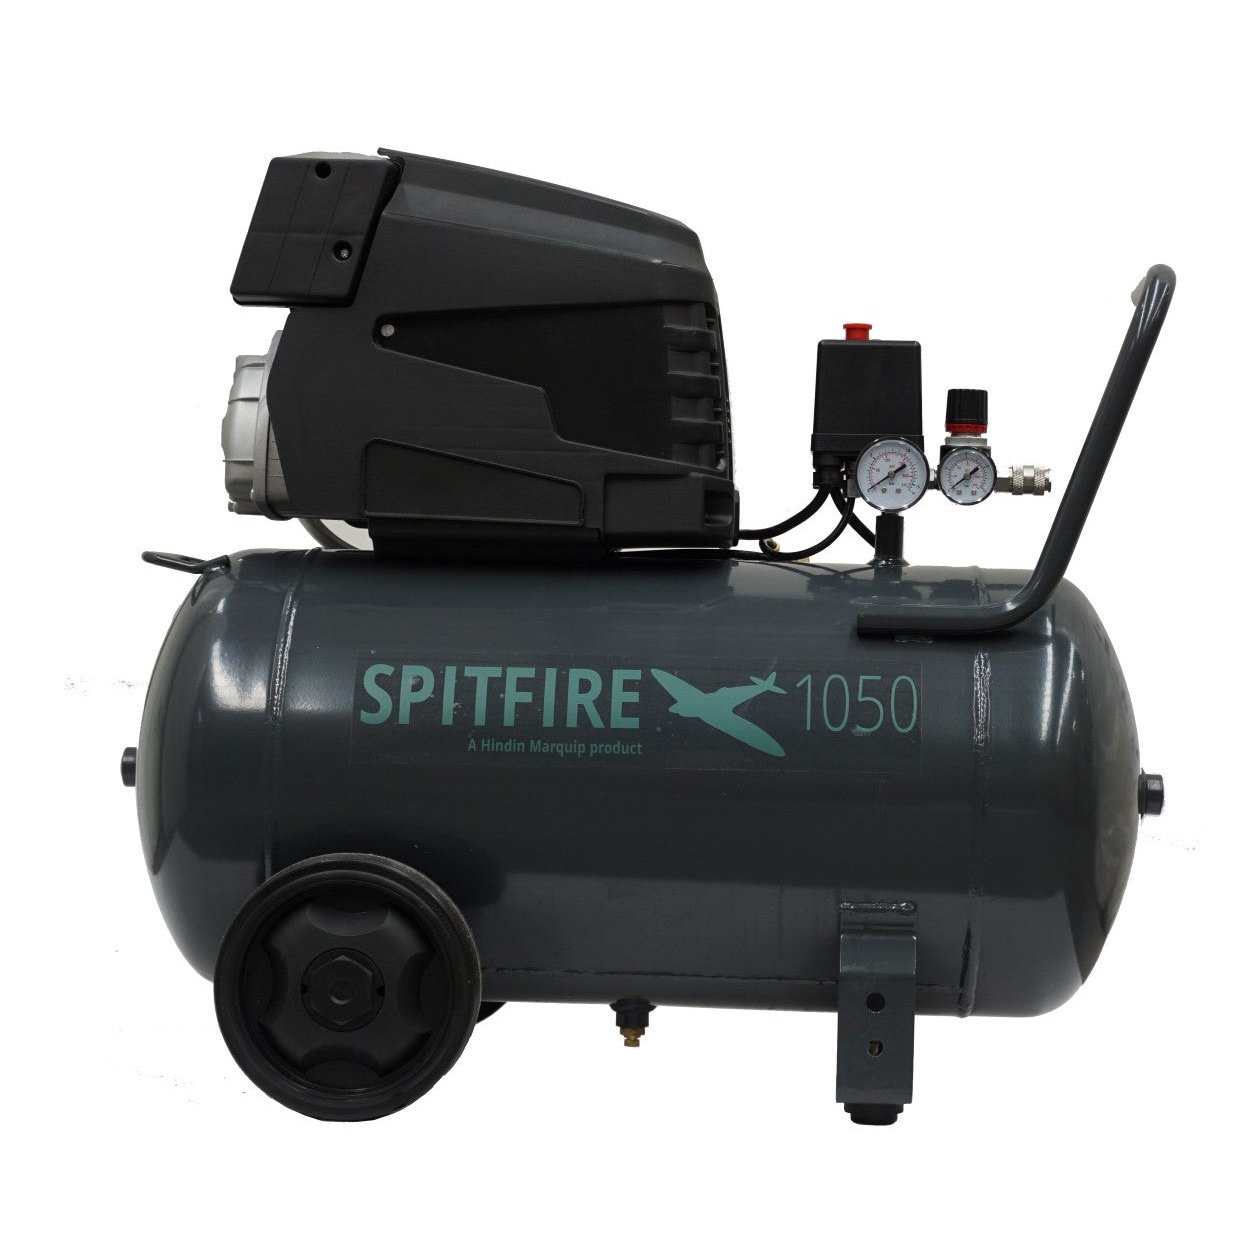 Hindin Spitfire 1050 2.5HP 50L Direct Drive Single Phase Compressor tool-junction-nz